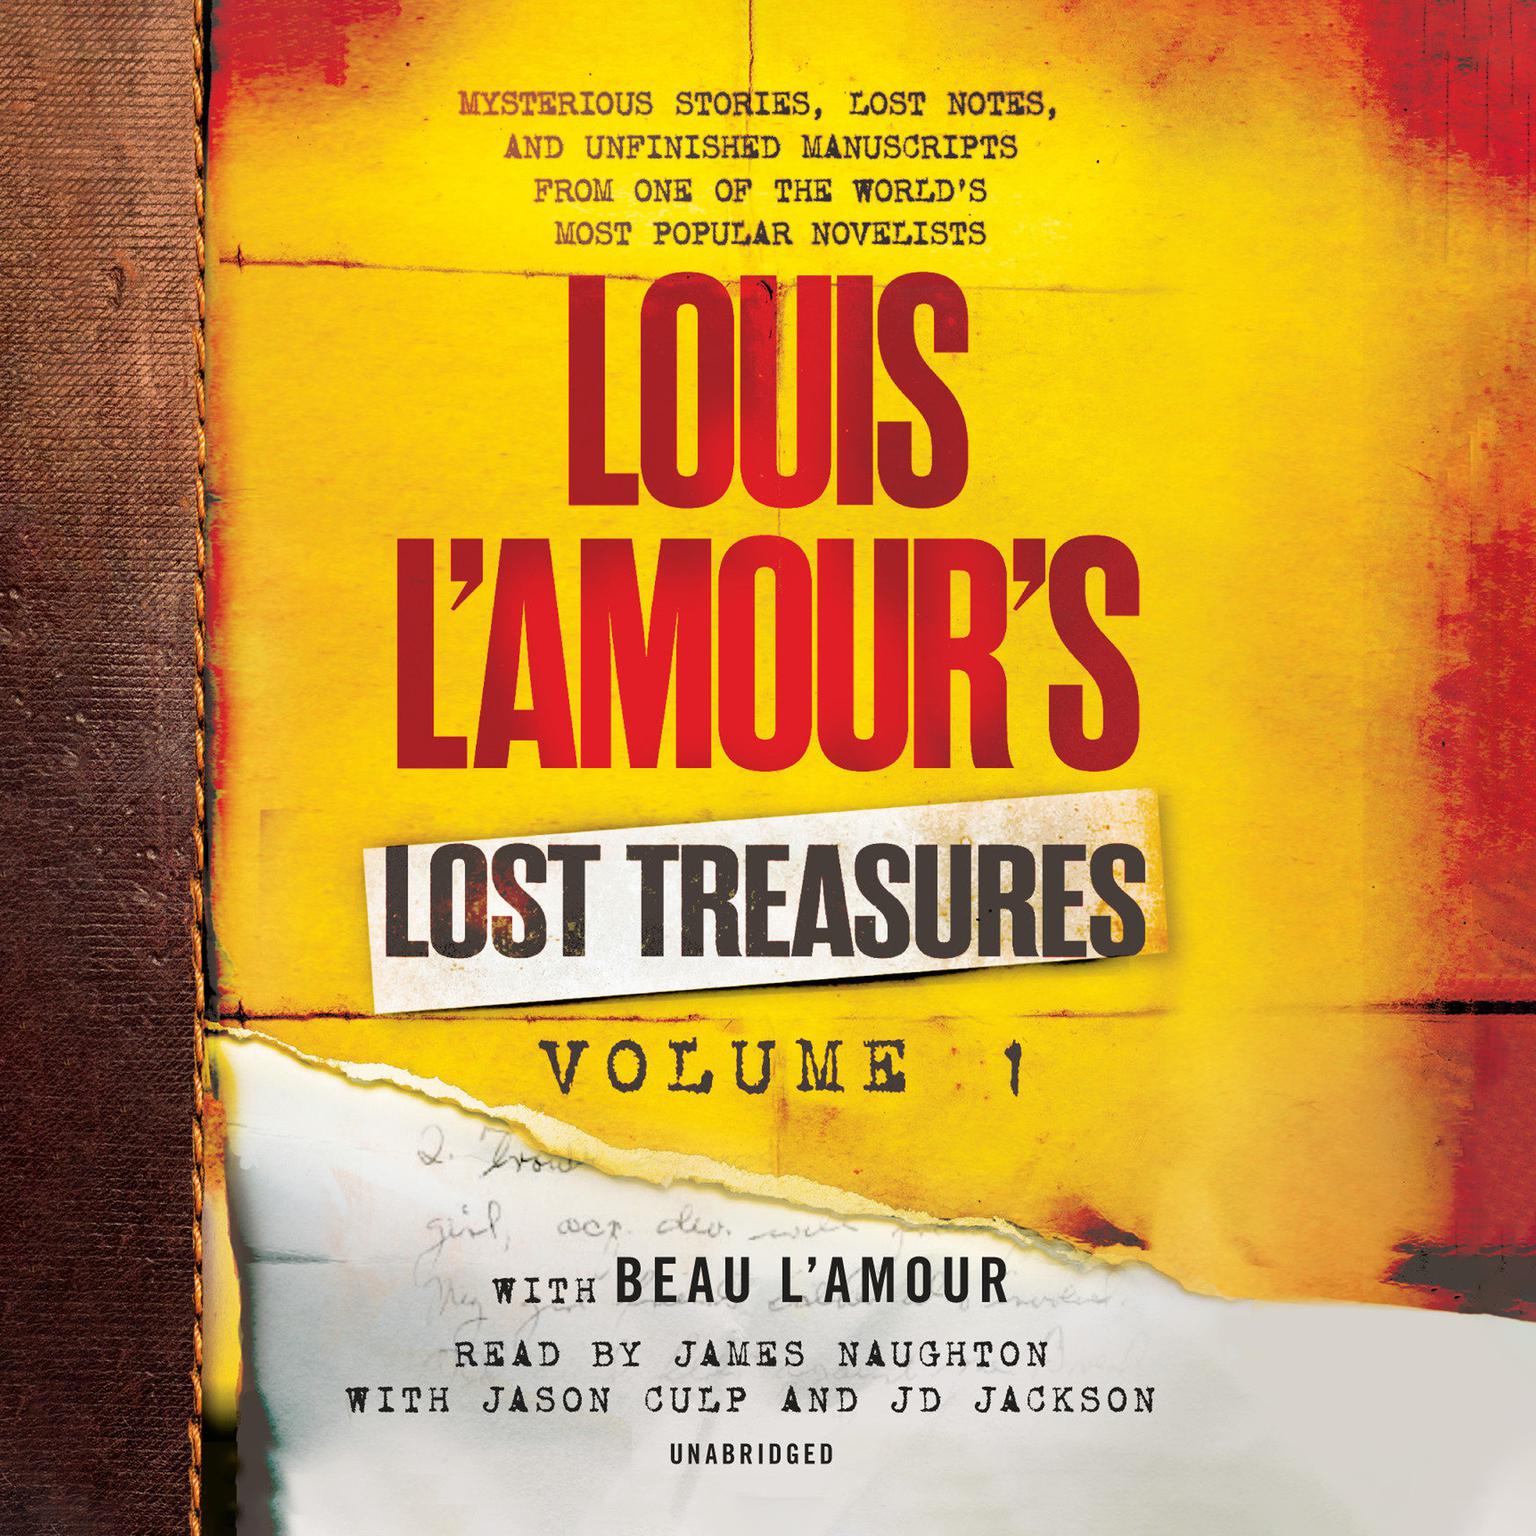 Louis L’Amour’s Lost Treasures: Volume 1: Mysterious Stories, Lost Notes, and Unfinished Manuscripts from One of the Worlds Most Popular Novelists Audiobook, by Louis L’Amour